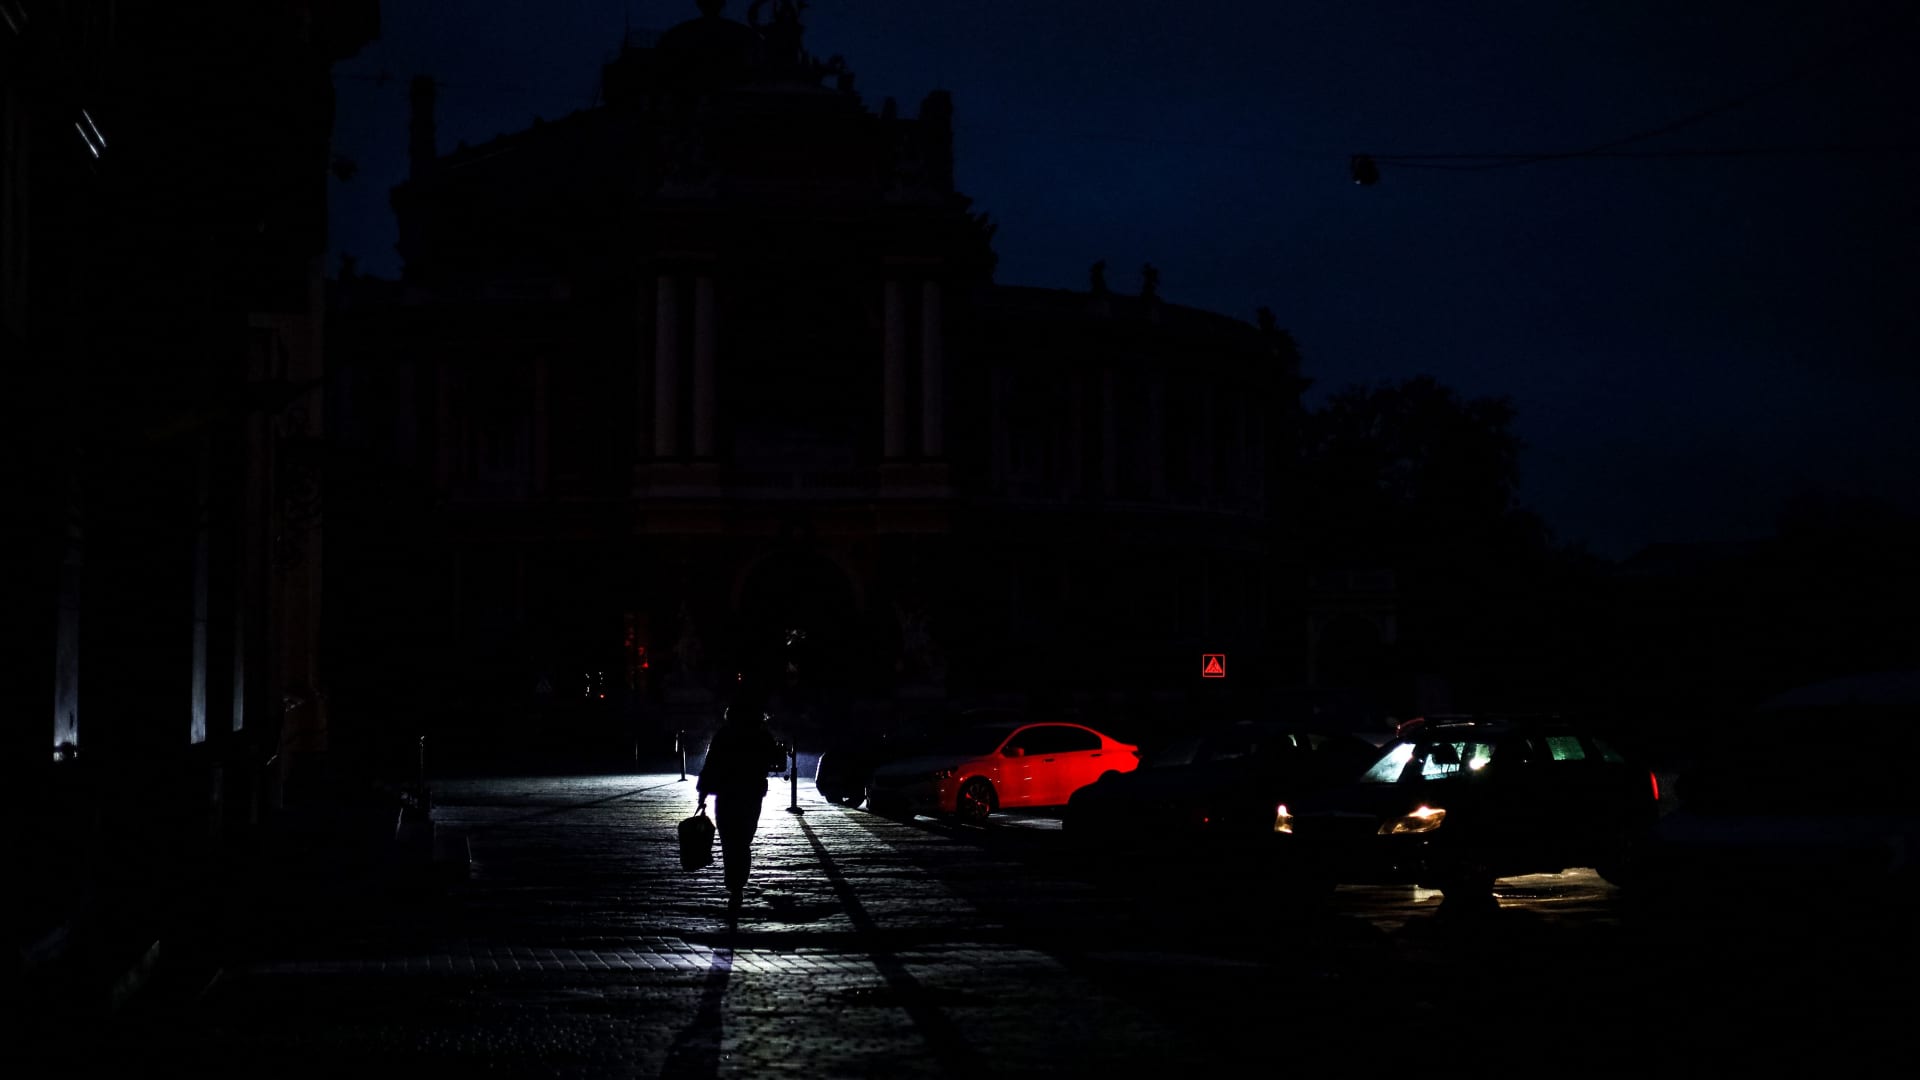 A pedestrian walks down a street during a power cut in downtown Odesa on December 5, 2022, amid the Russian invasion of Ukraine.